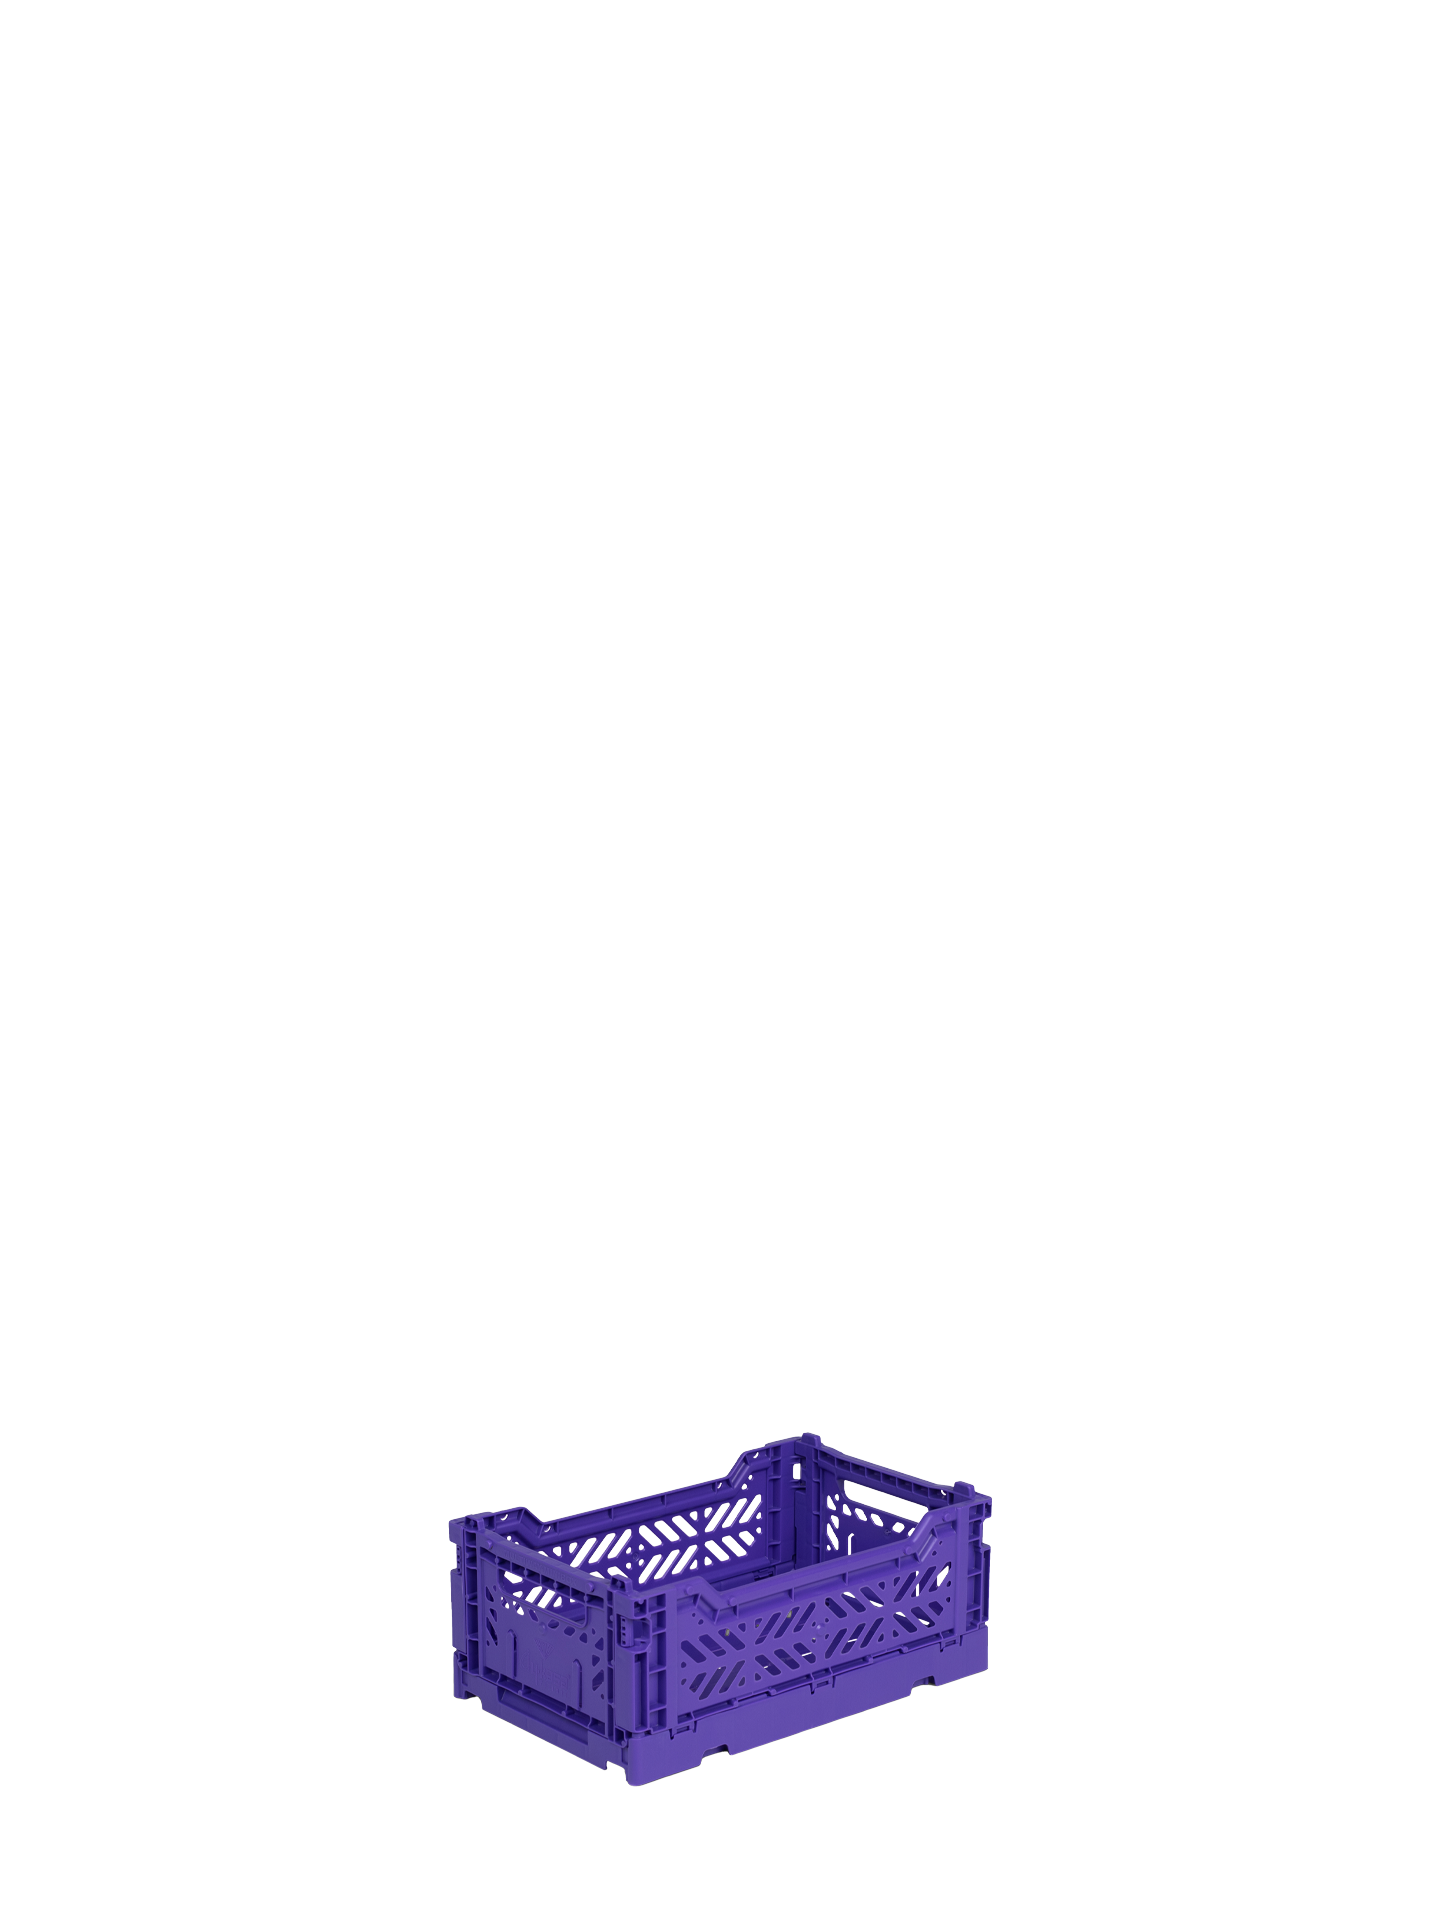 Mini Aykasa crate in classic purple violet stacks and folds